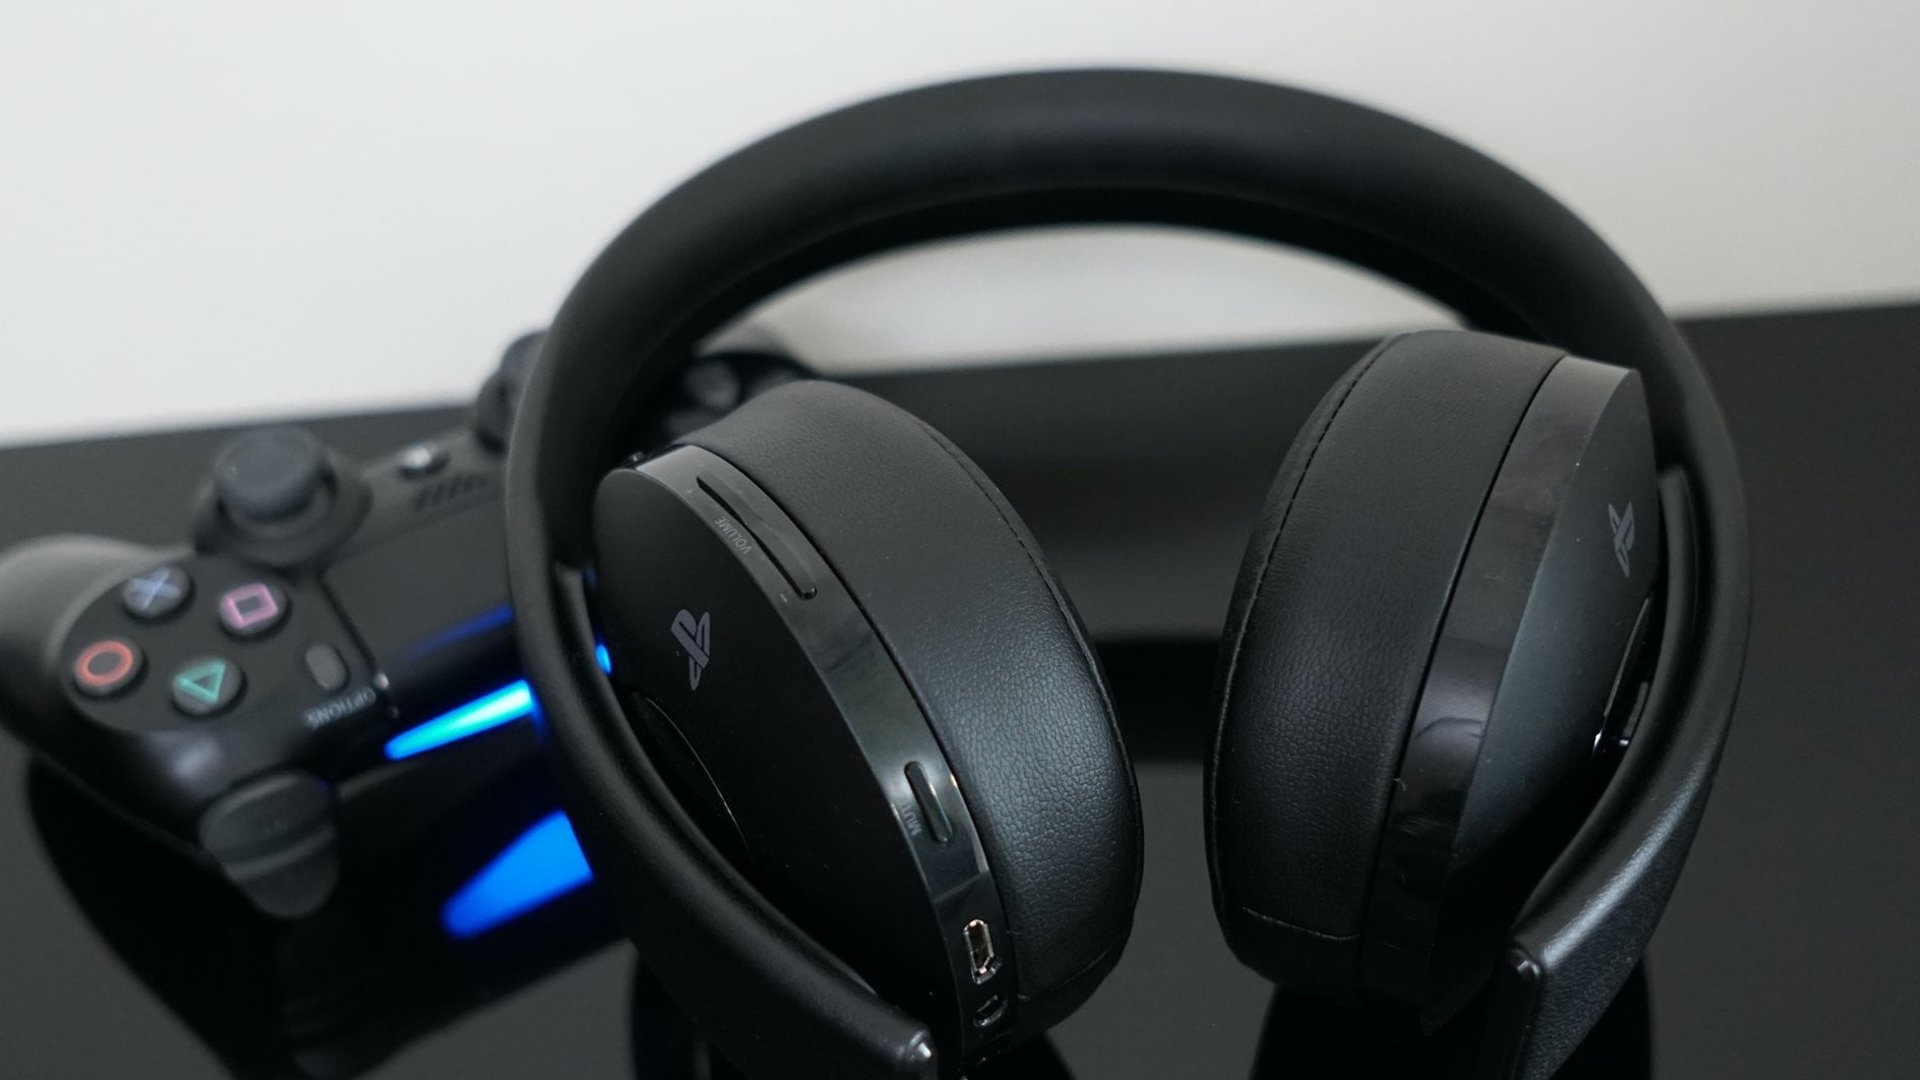 How To Connect Bluetooth Headphones To PS4